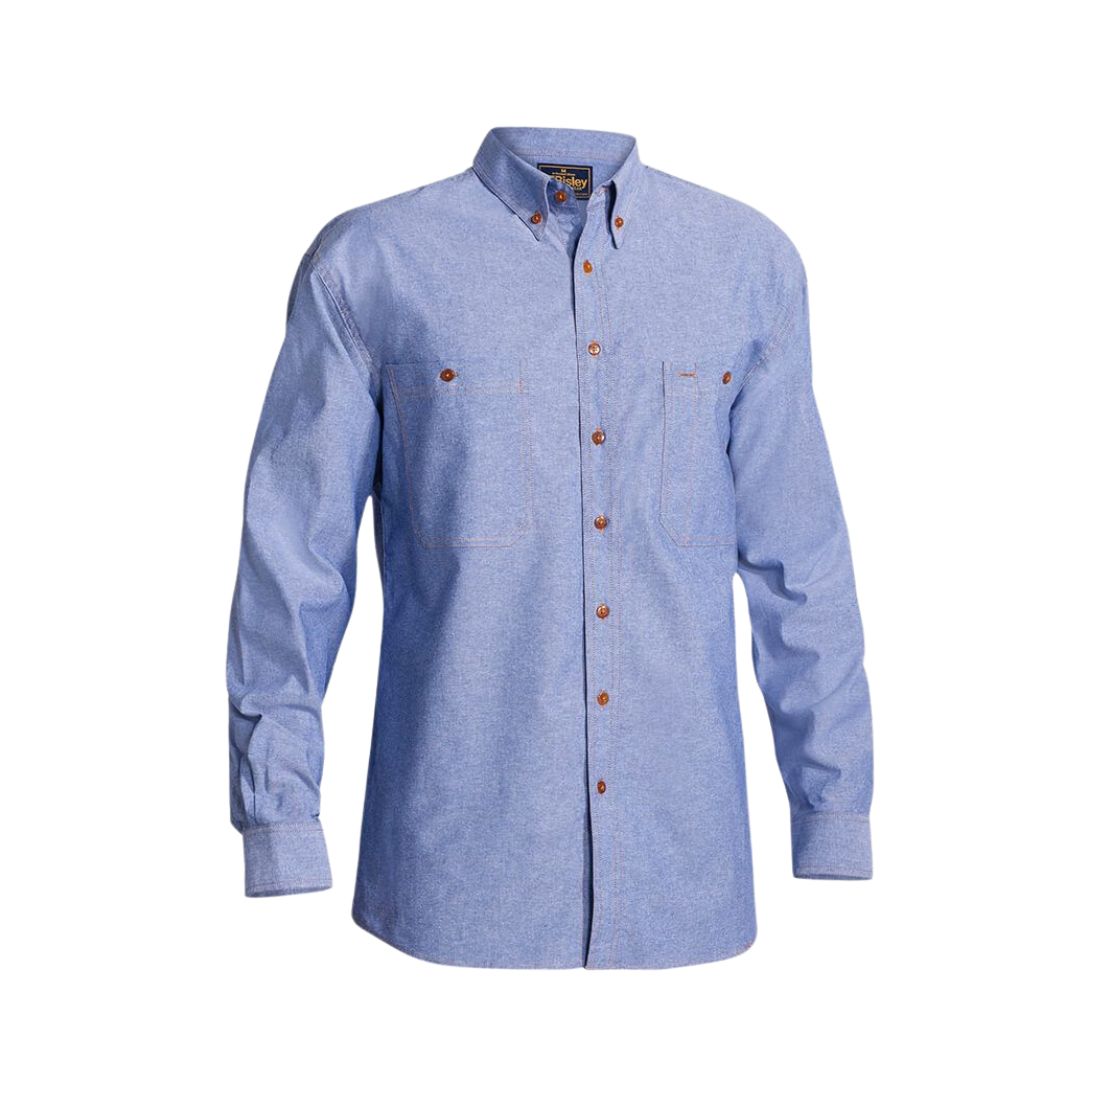 Chambray Shirt - Long Sleeve S Blue Workwear by Bisley | The Bloke Shop